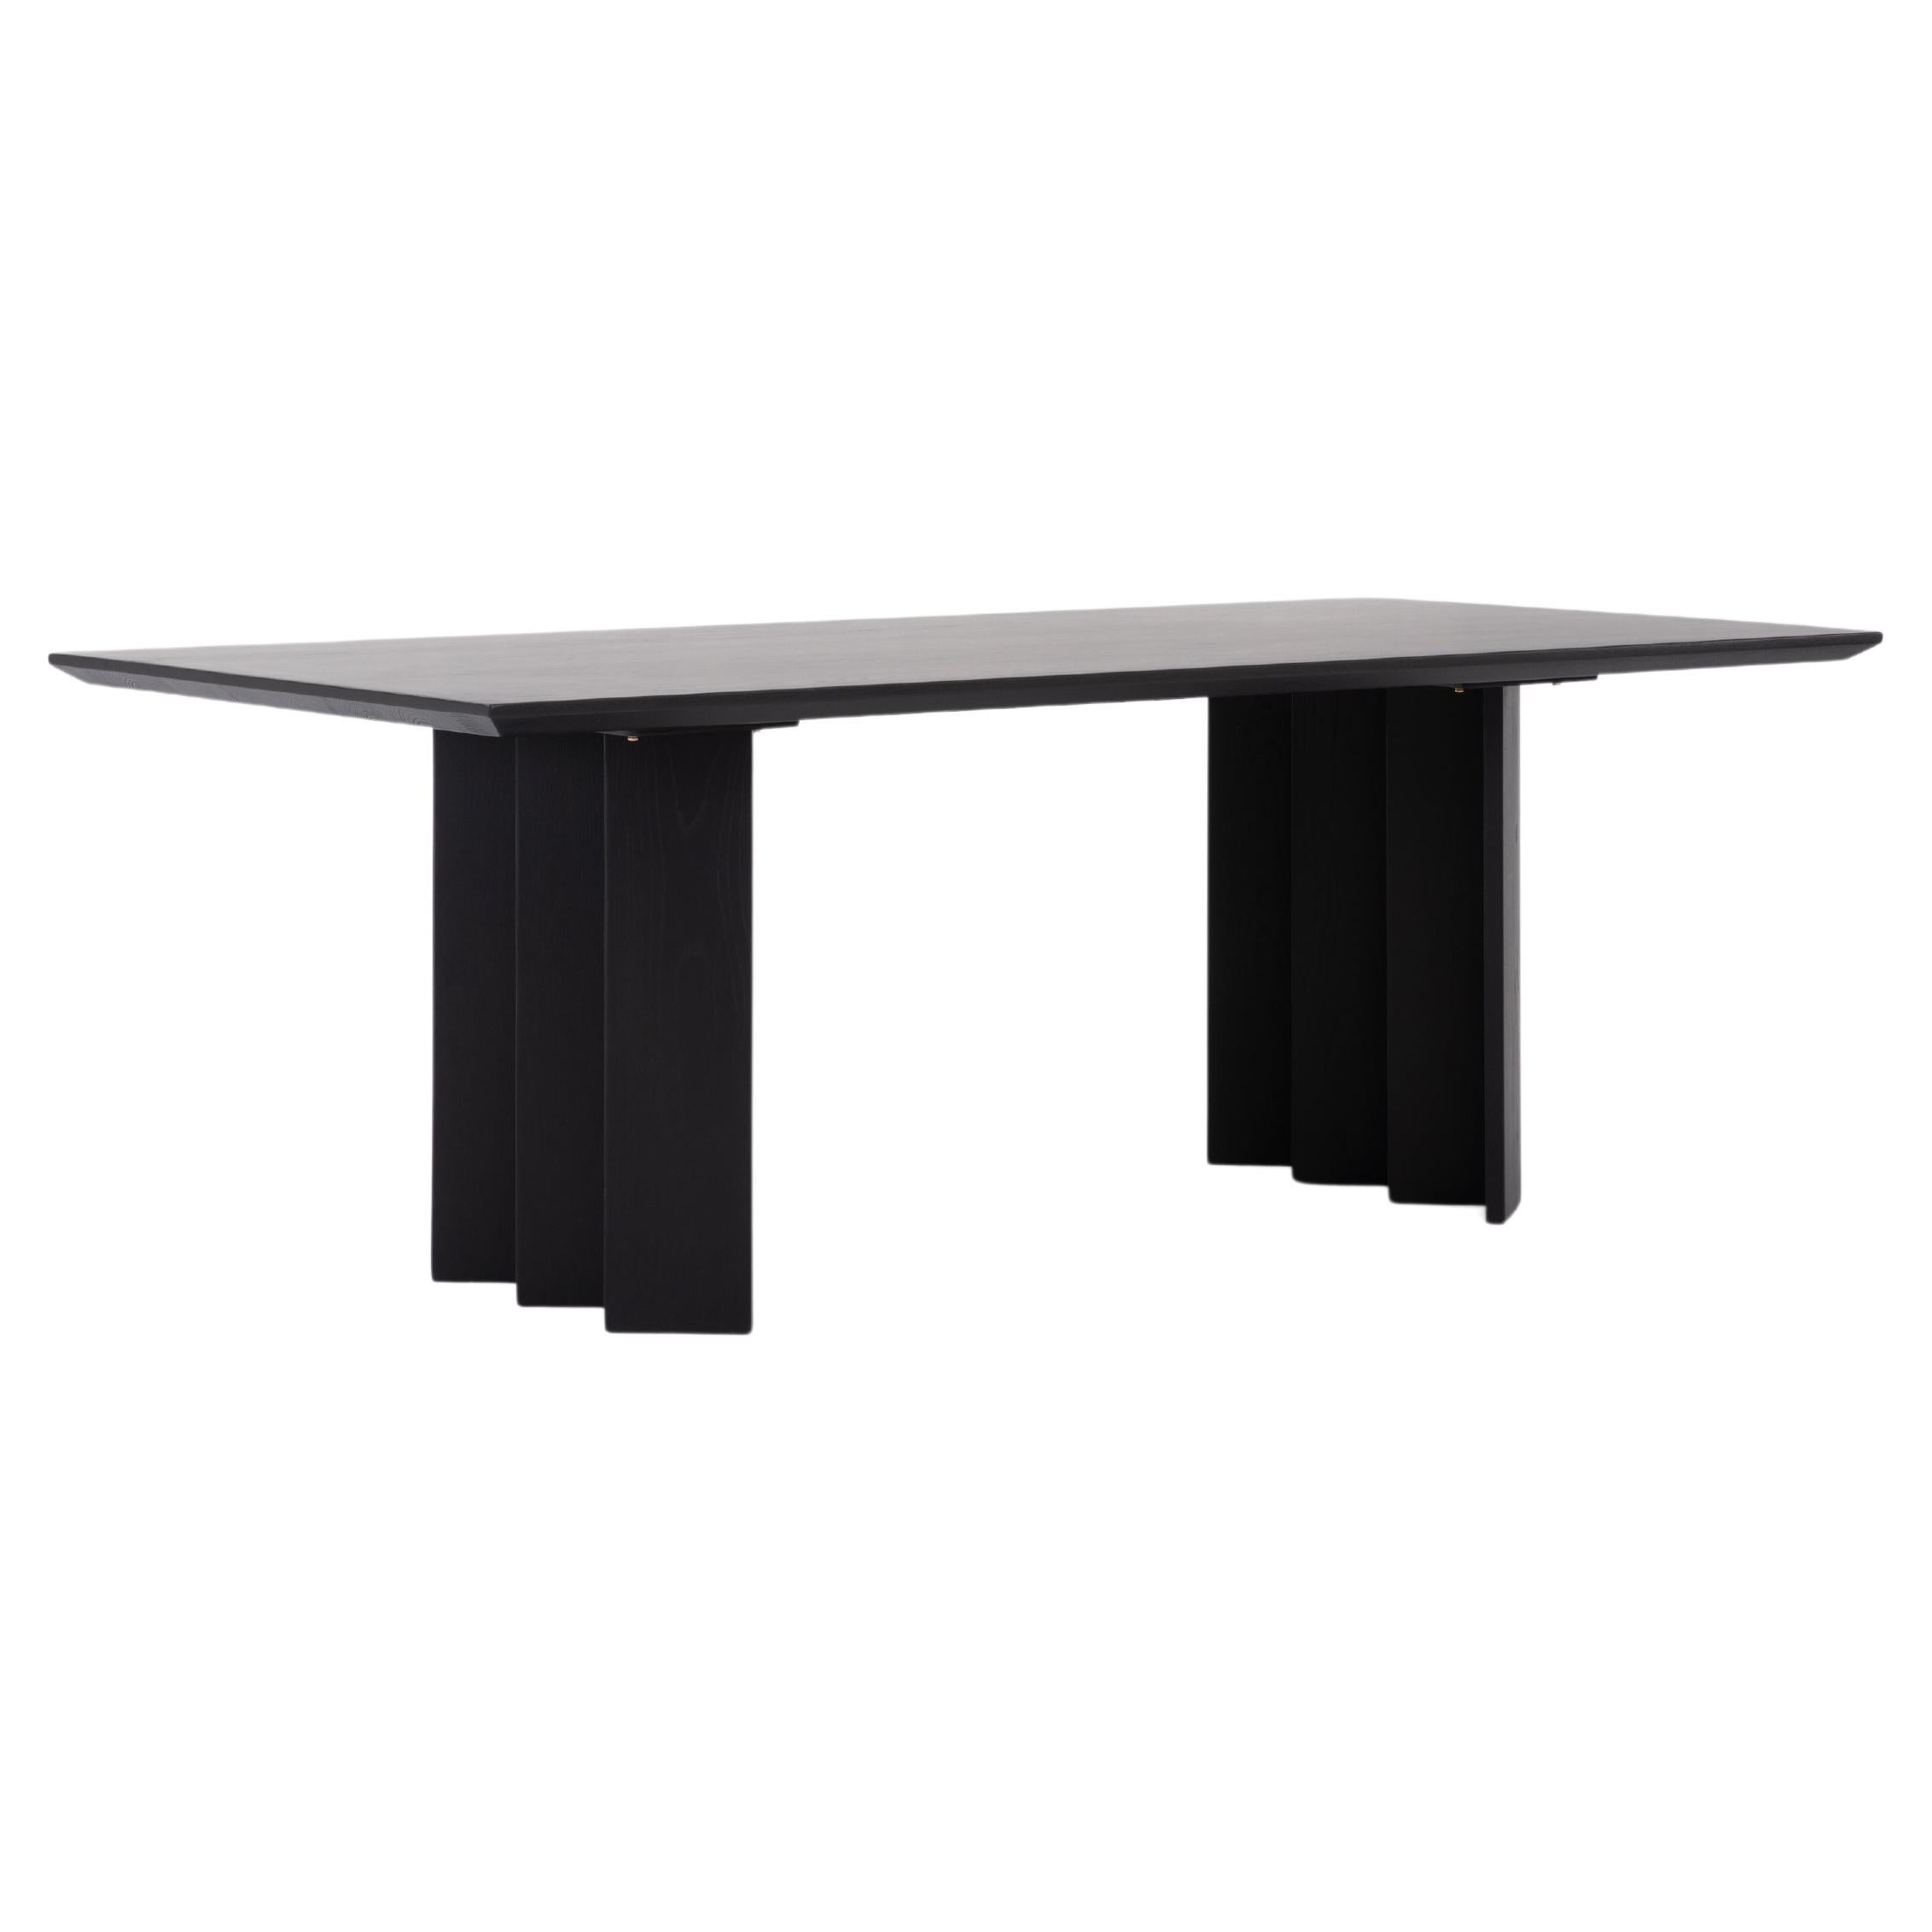 Zafal Dining Table 84", Black Minimalist Dining Table in Wood